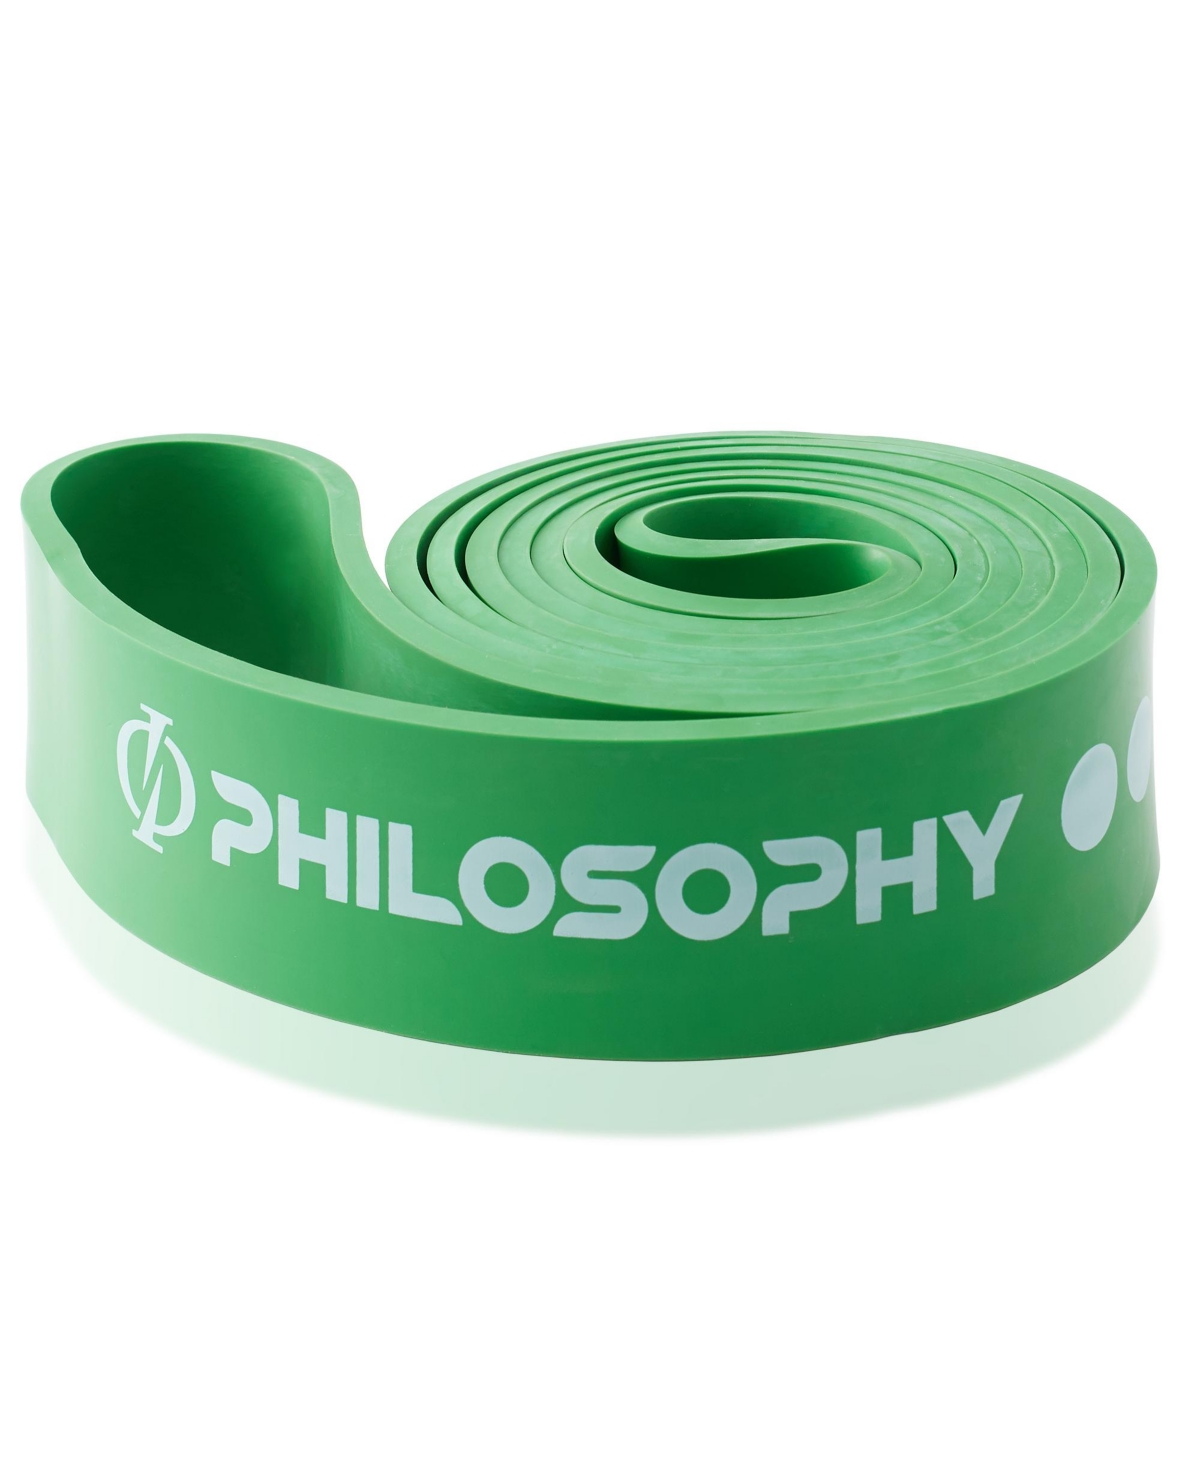 - Resistance Band - 1-3/4" (120-175 lbs), Green - Green